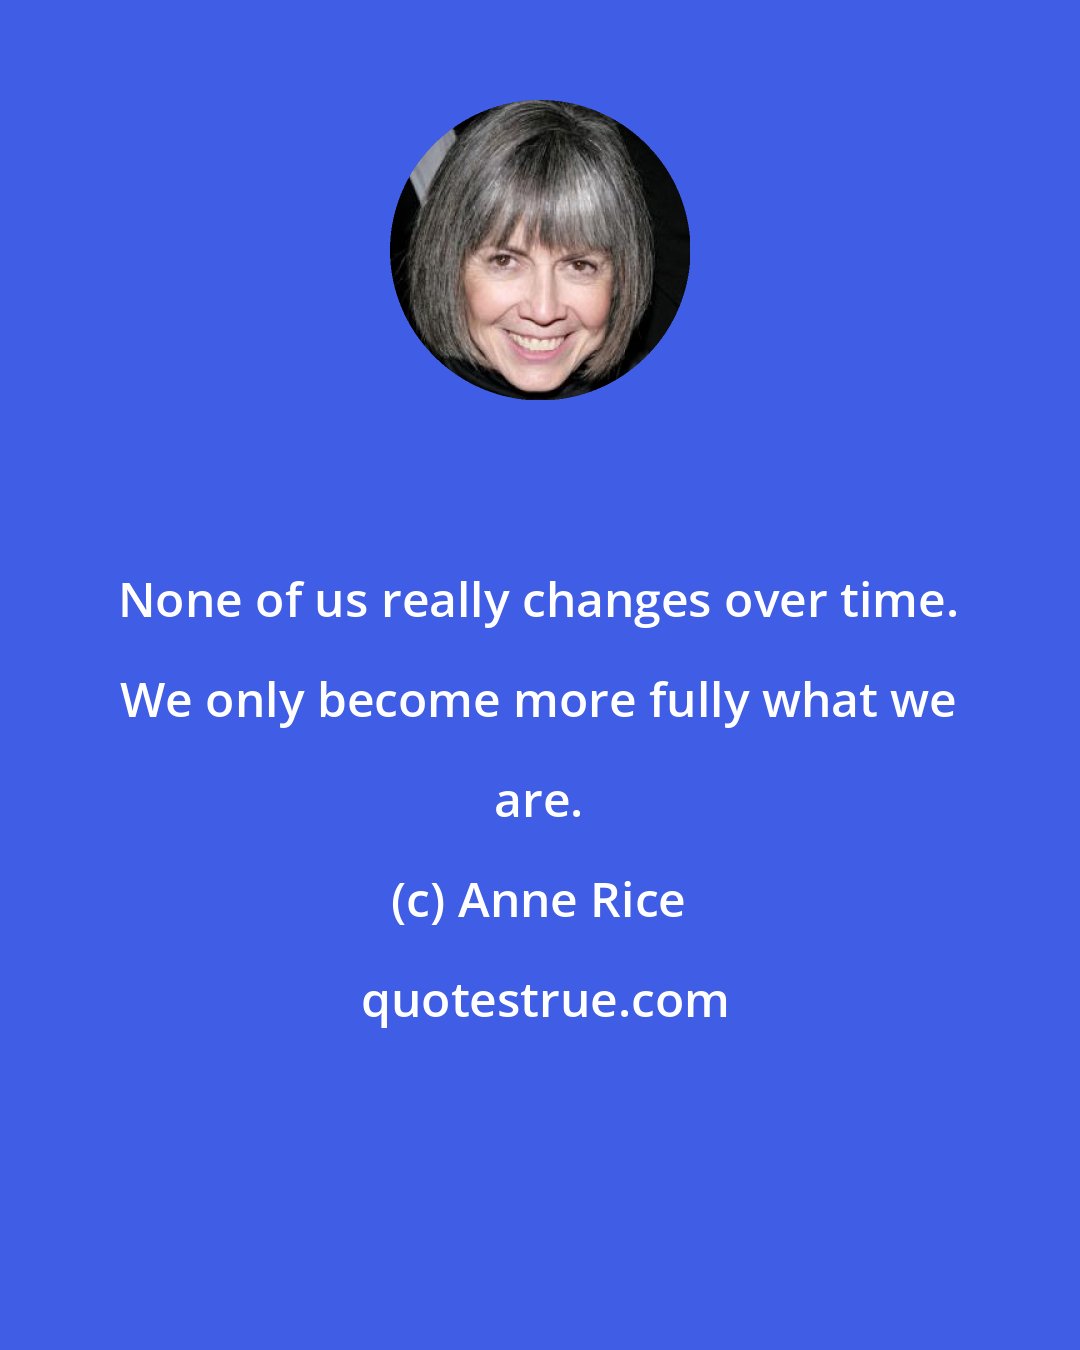 Anne Rice: None of us really changes over time. We only become more fully what we are.